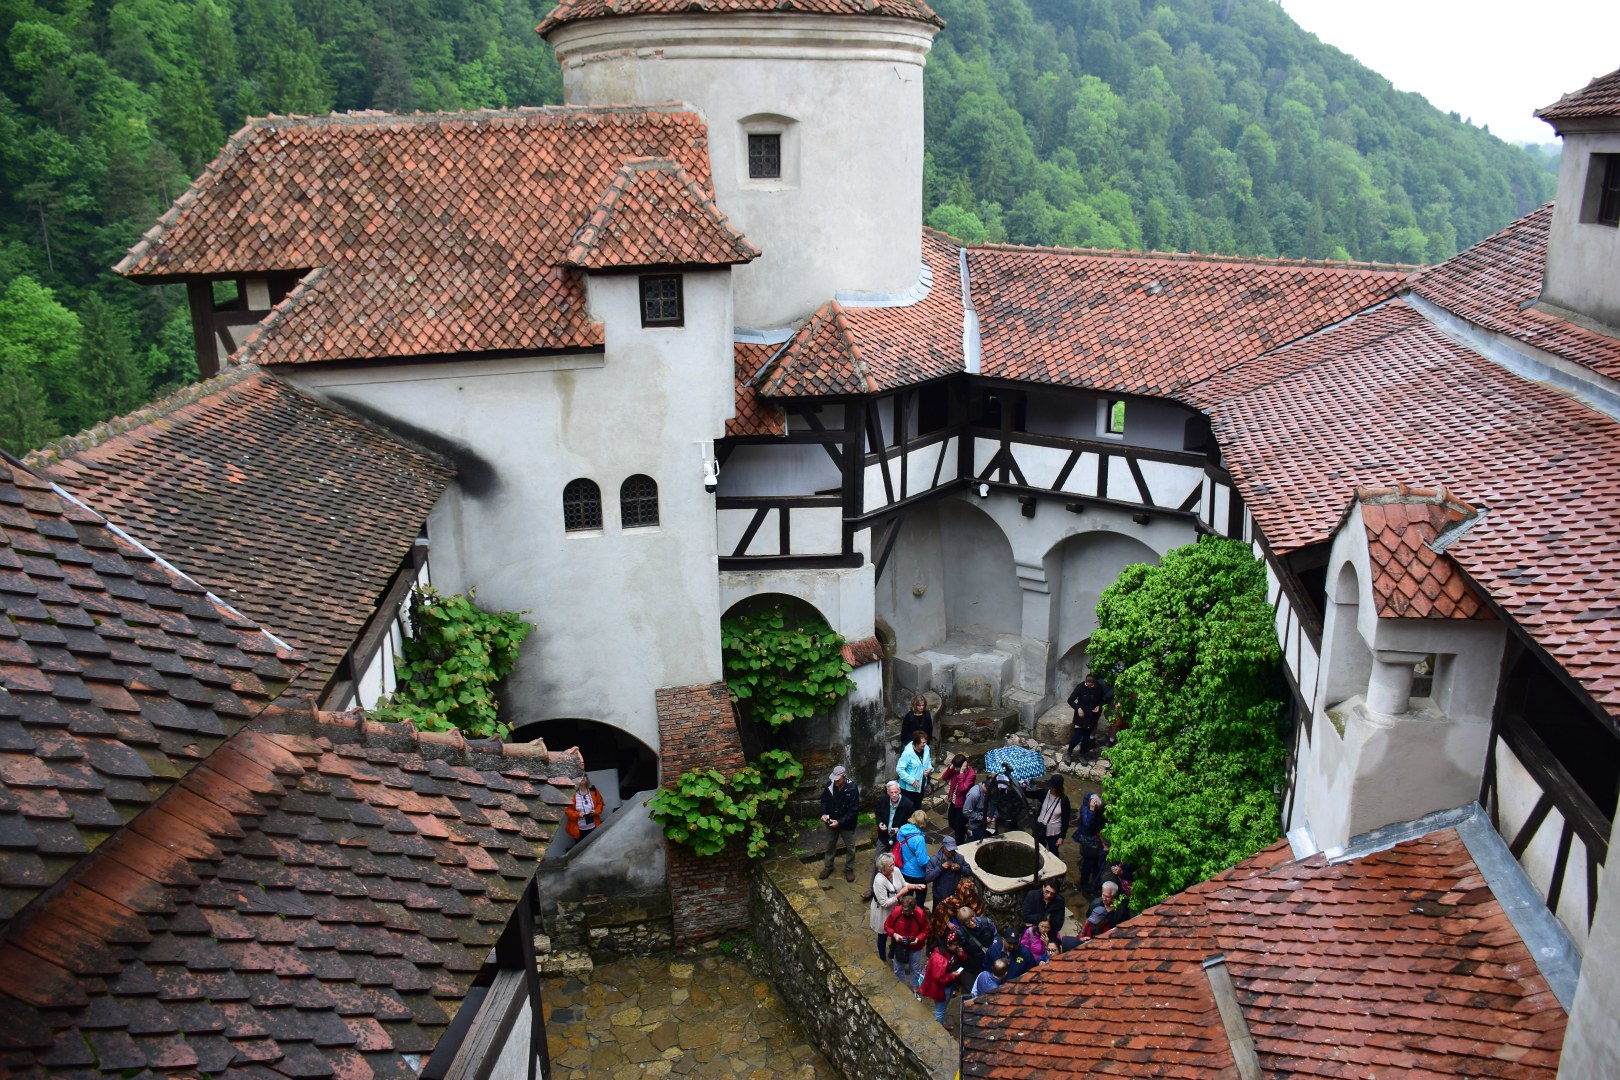 Courtyard and Powder Tower, Bran Castle